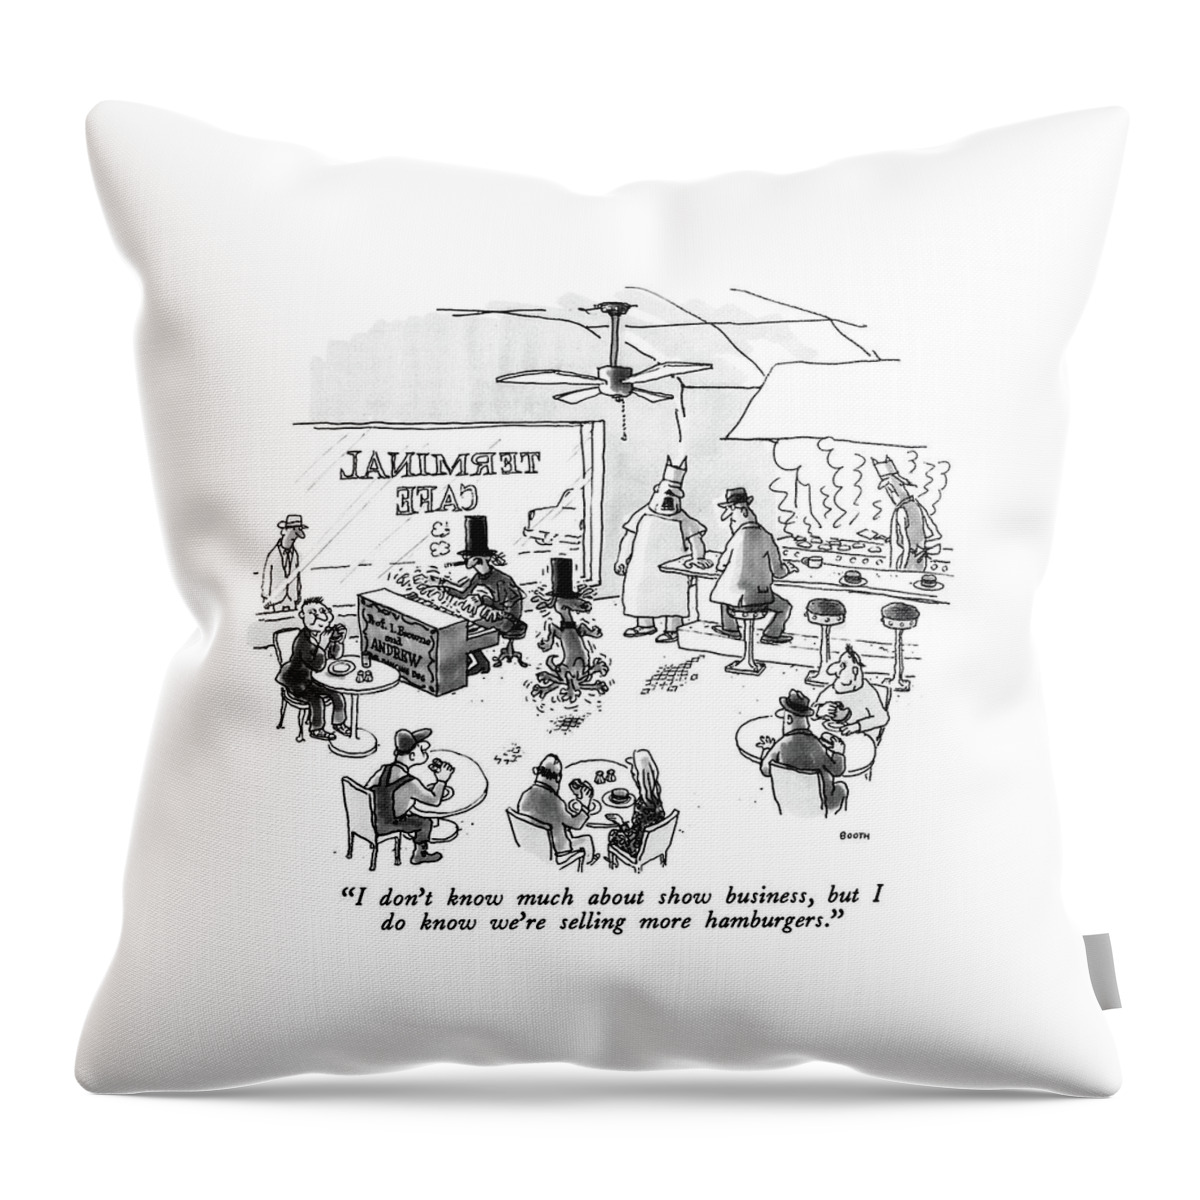 I Don't Know Much About Show Business Throw Pillow